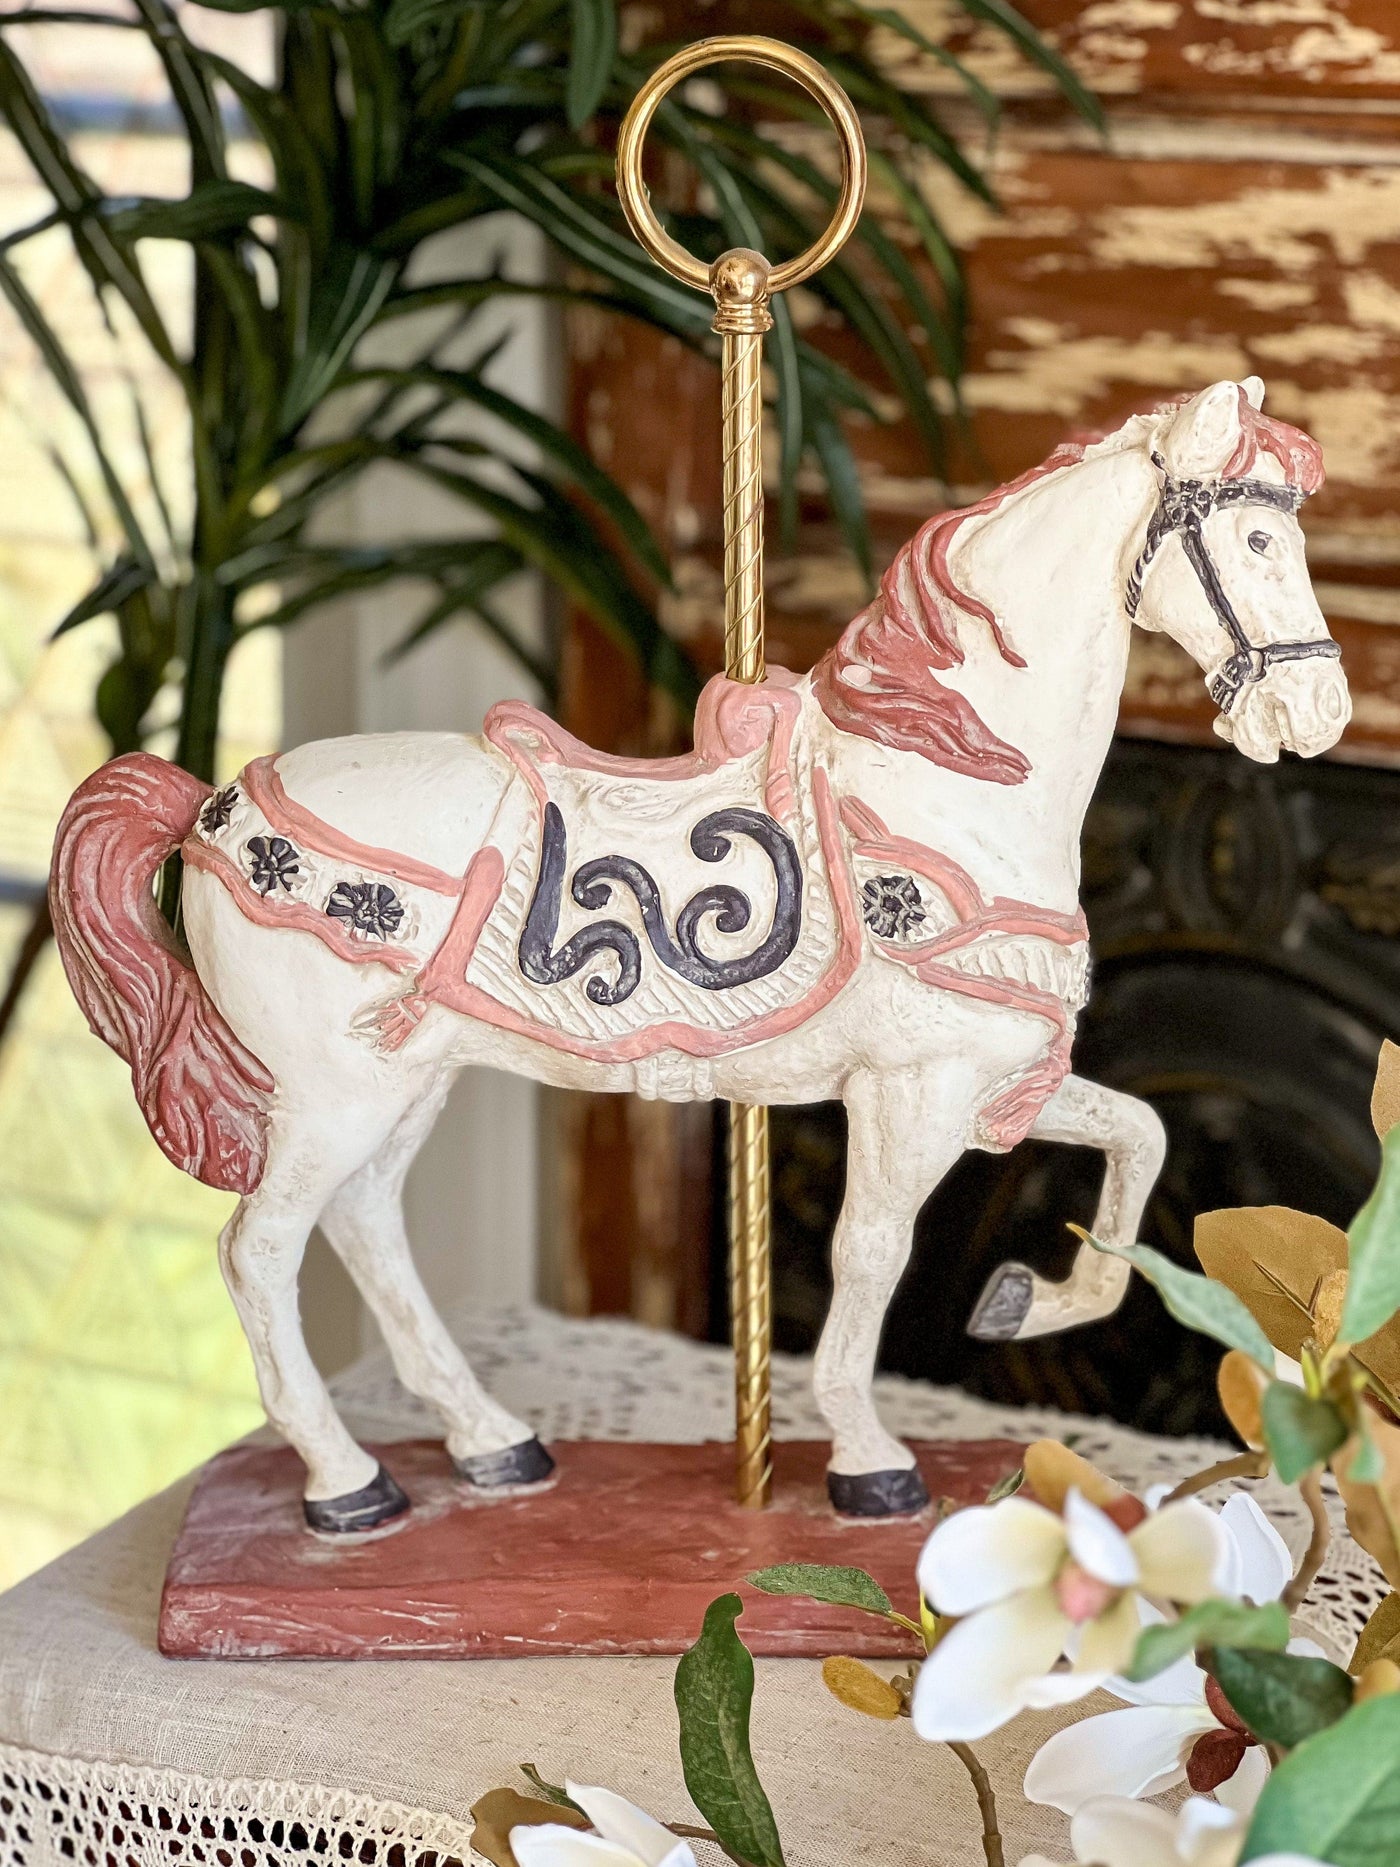 Carousel Horse Sculpture Statue by Austin Productions (1983) Revive In Style Vintage Furniture Painted Refinished Redesign Beautiful One of a Kind Artistic Antique Unique Home Decor Interior Design French Country Shabby Chic Cottage Farmhouse Grandmillenial Coastal Chalk Paint Metallic Glam Eclectic Quality Dovetailed Rustic Furniture Painter Pinterest Bedroom Living Room Entryway Kitchen Home Trends House Styles Decorating ideas